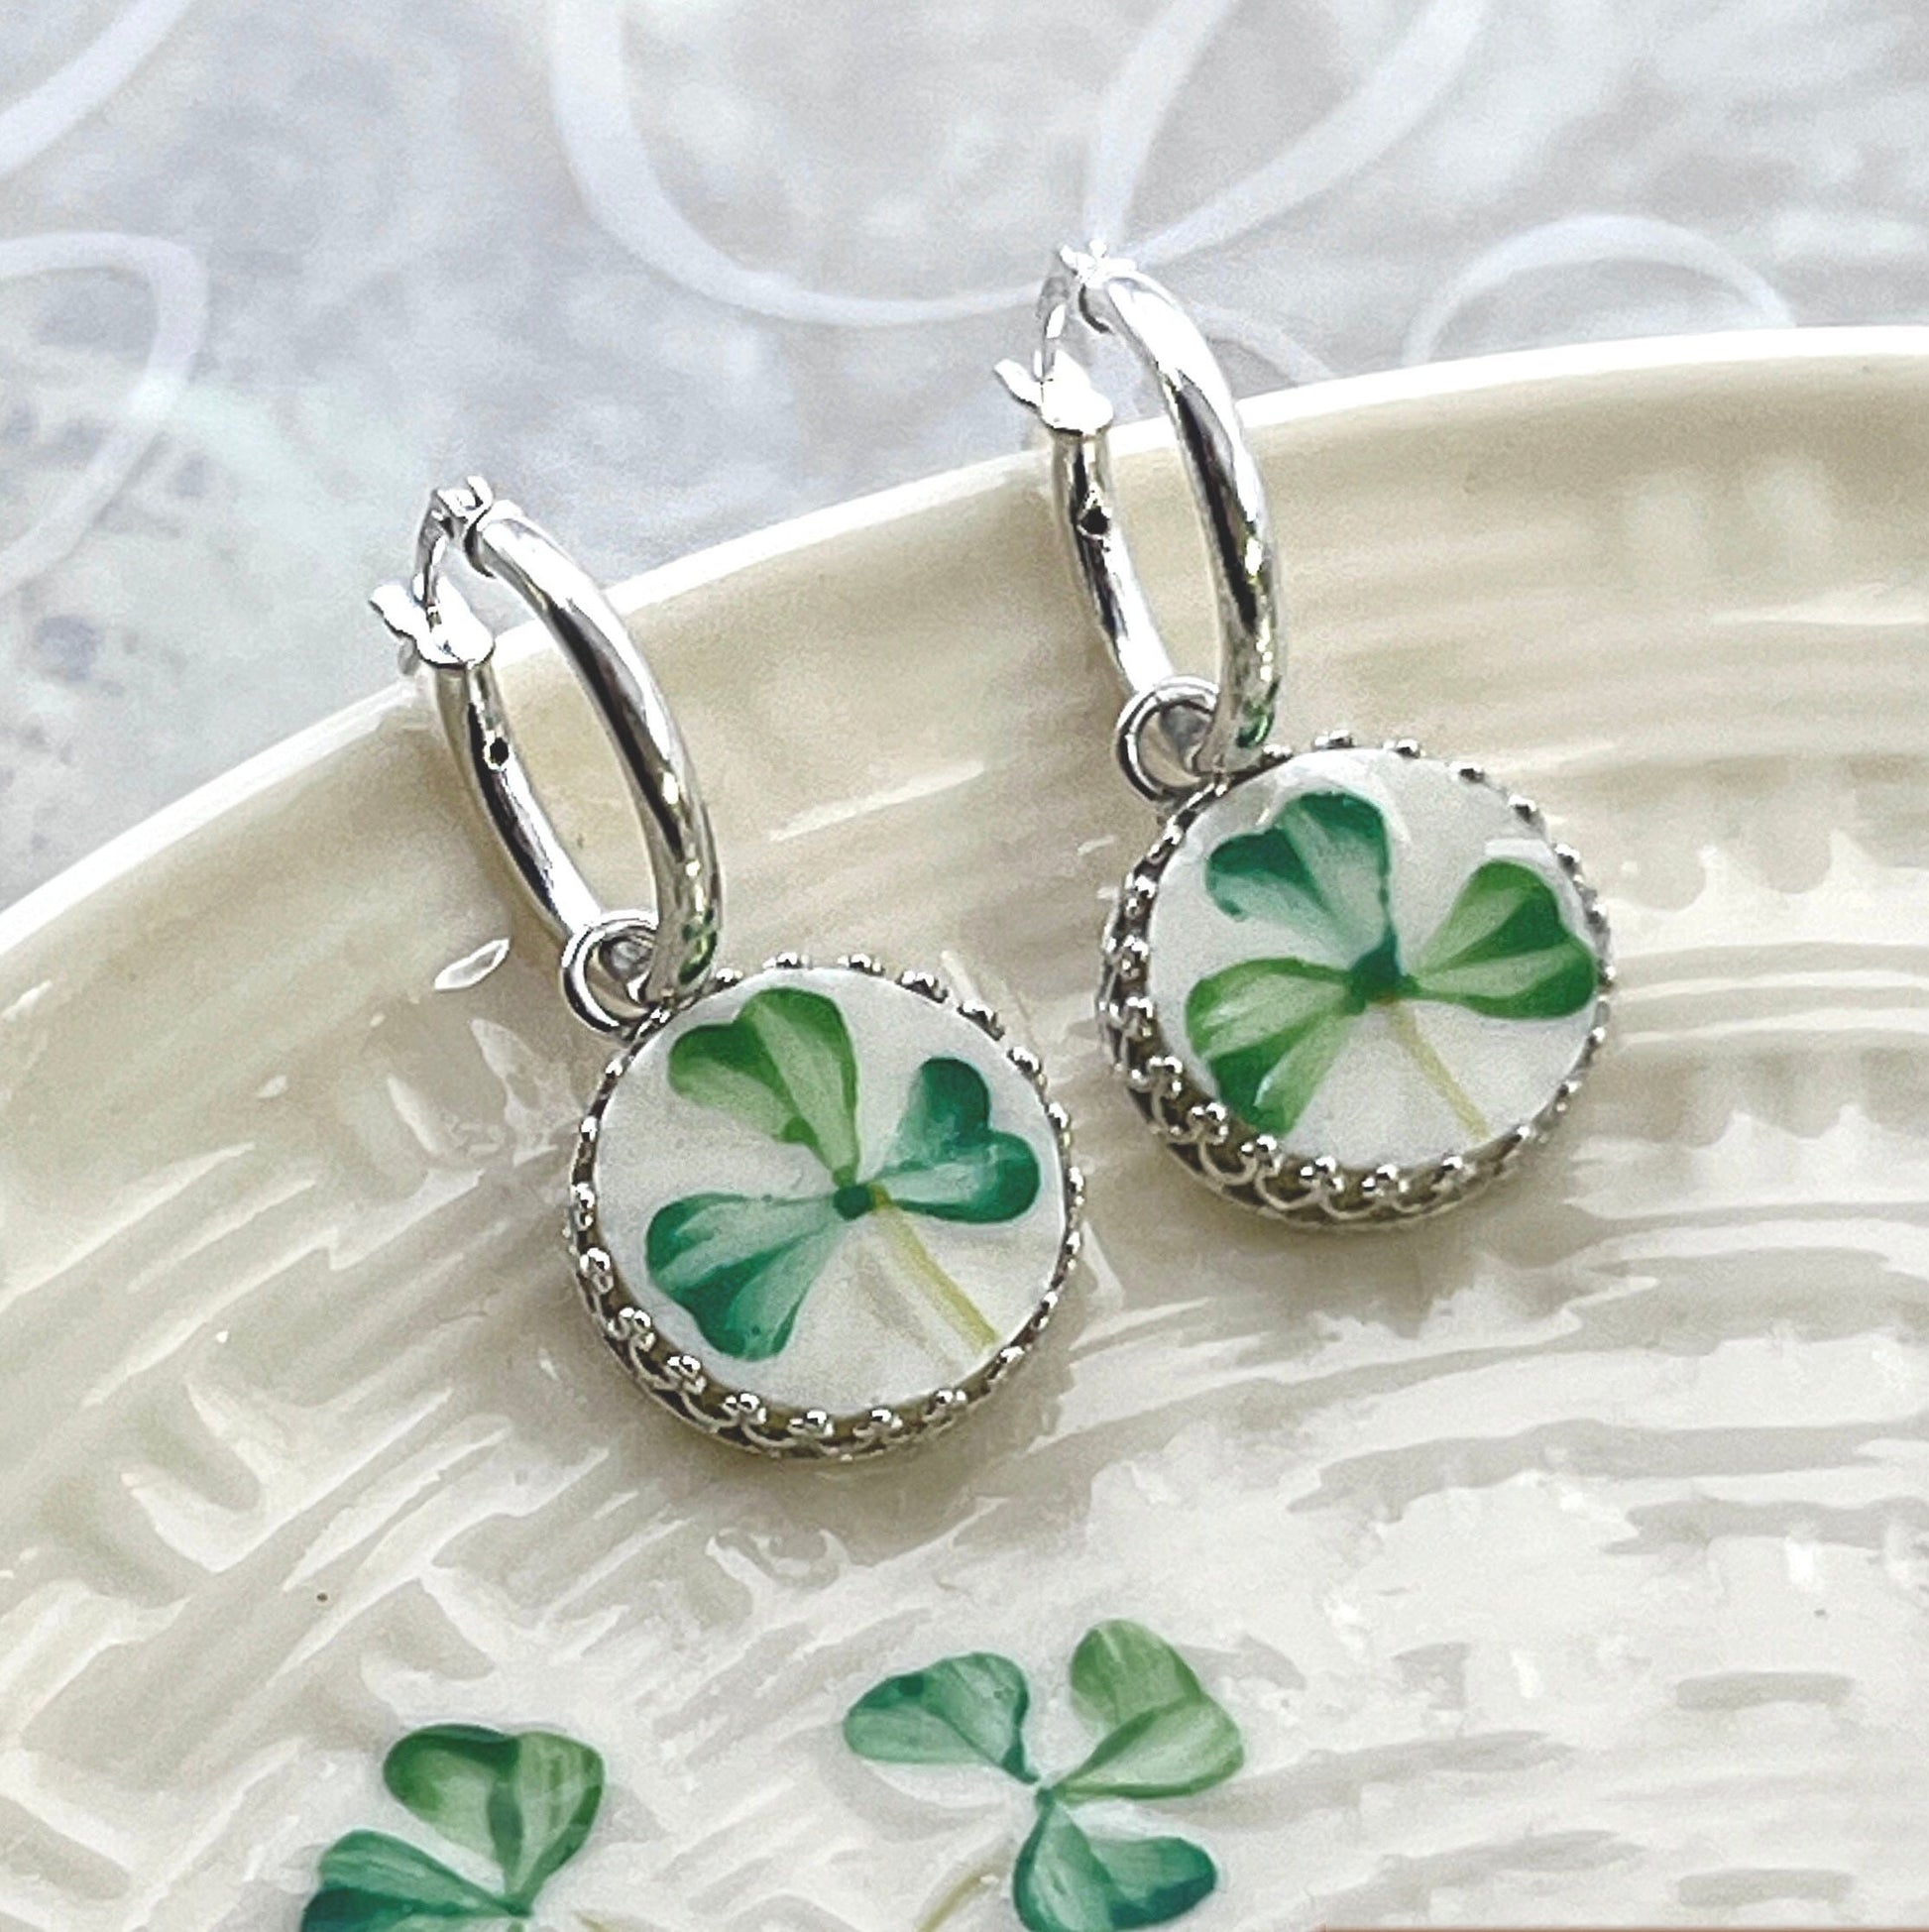 Sterling Silver Shamrock Hoop Earrings, Vintage Broken China Jewelry, Anniversary Gifts for Her, Irish Jewelry Gift